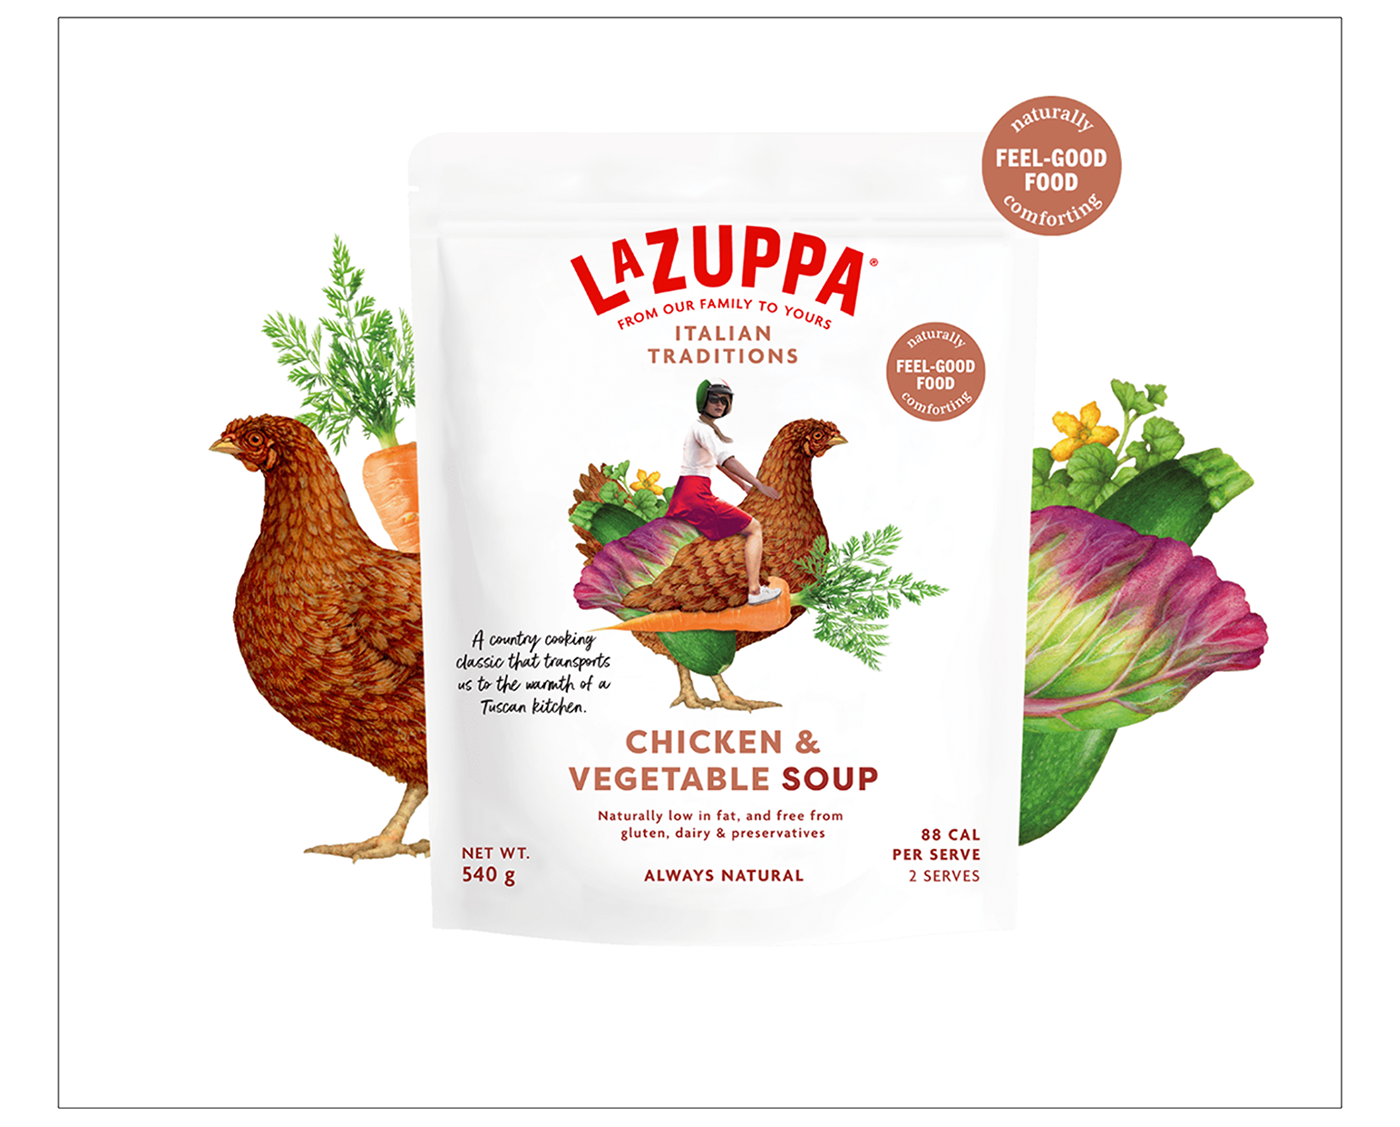 Chicken and zucchini illustrations used in a collage illustration for La Zuppa soup packaging.